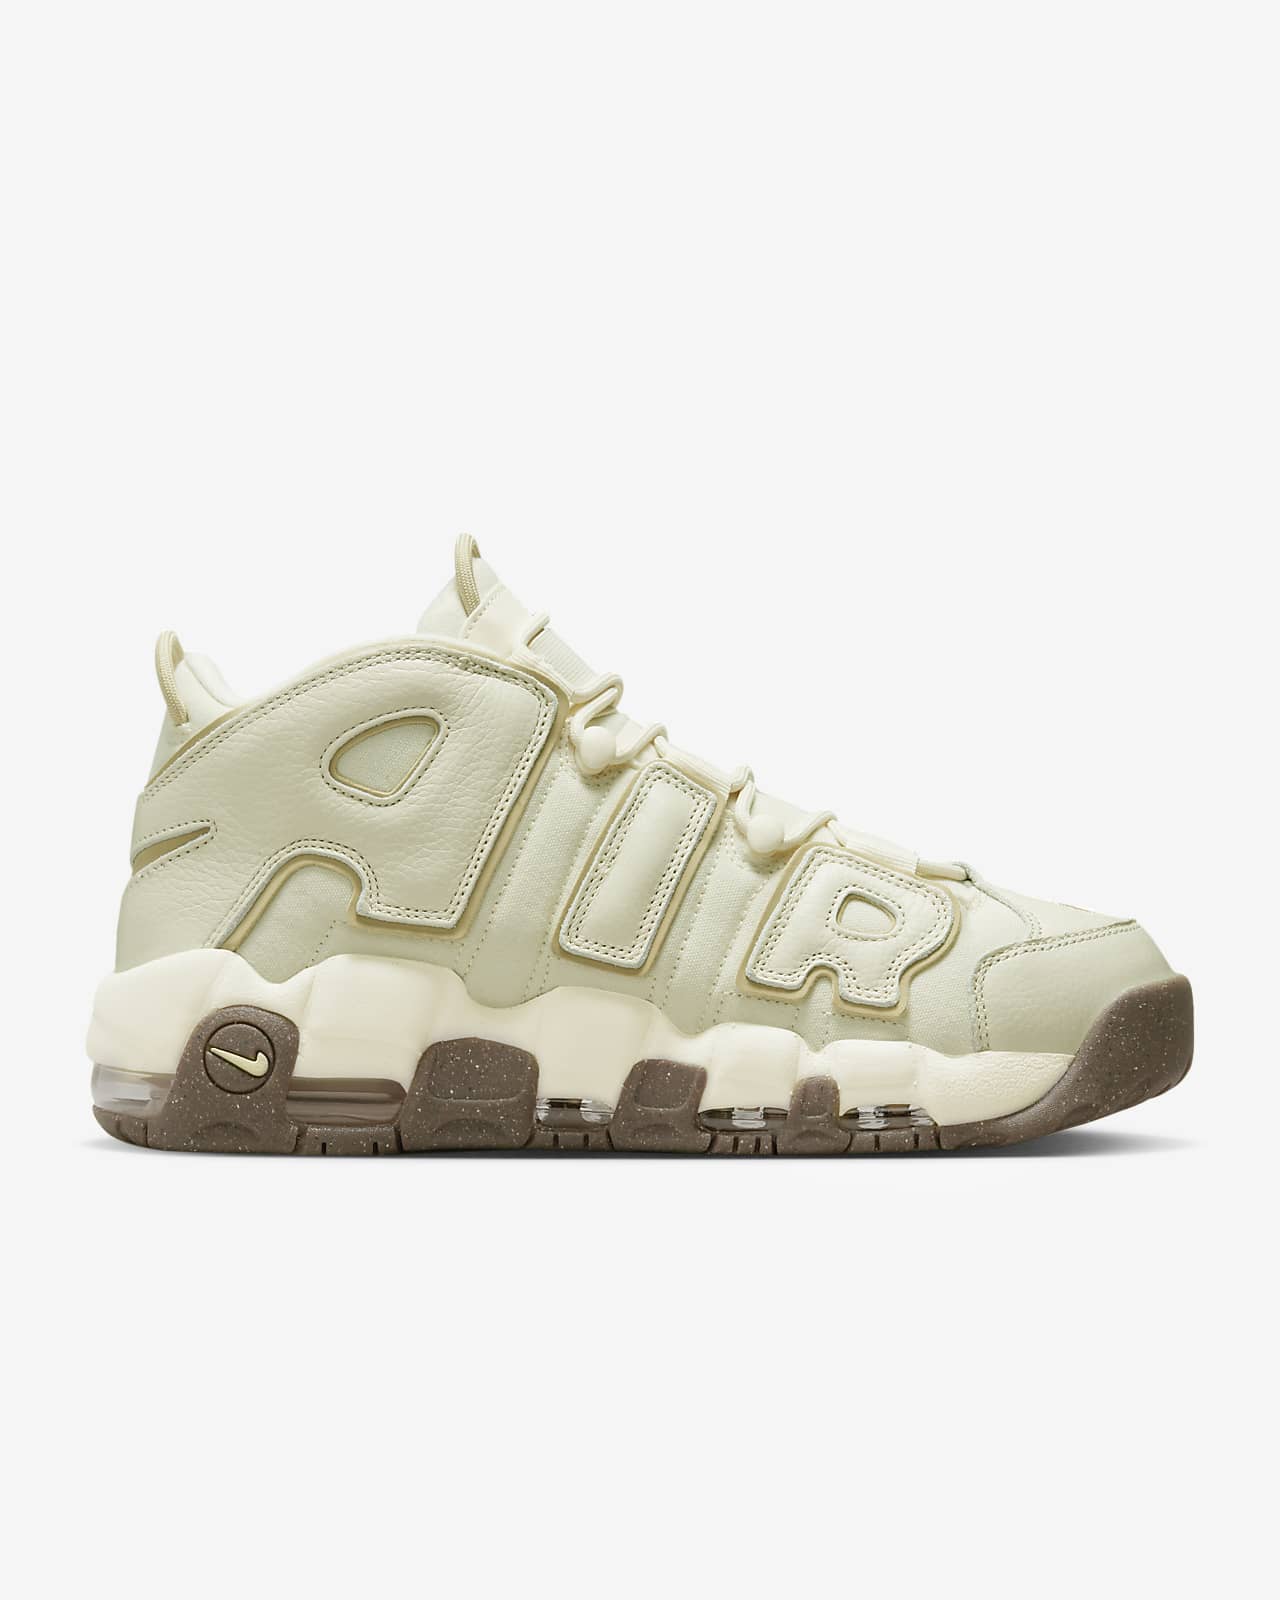 Nike Air More Uptempo 96 'France